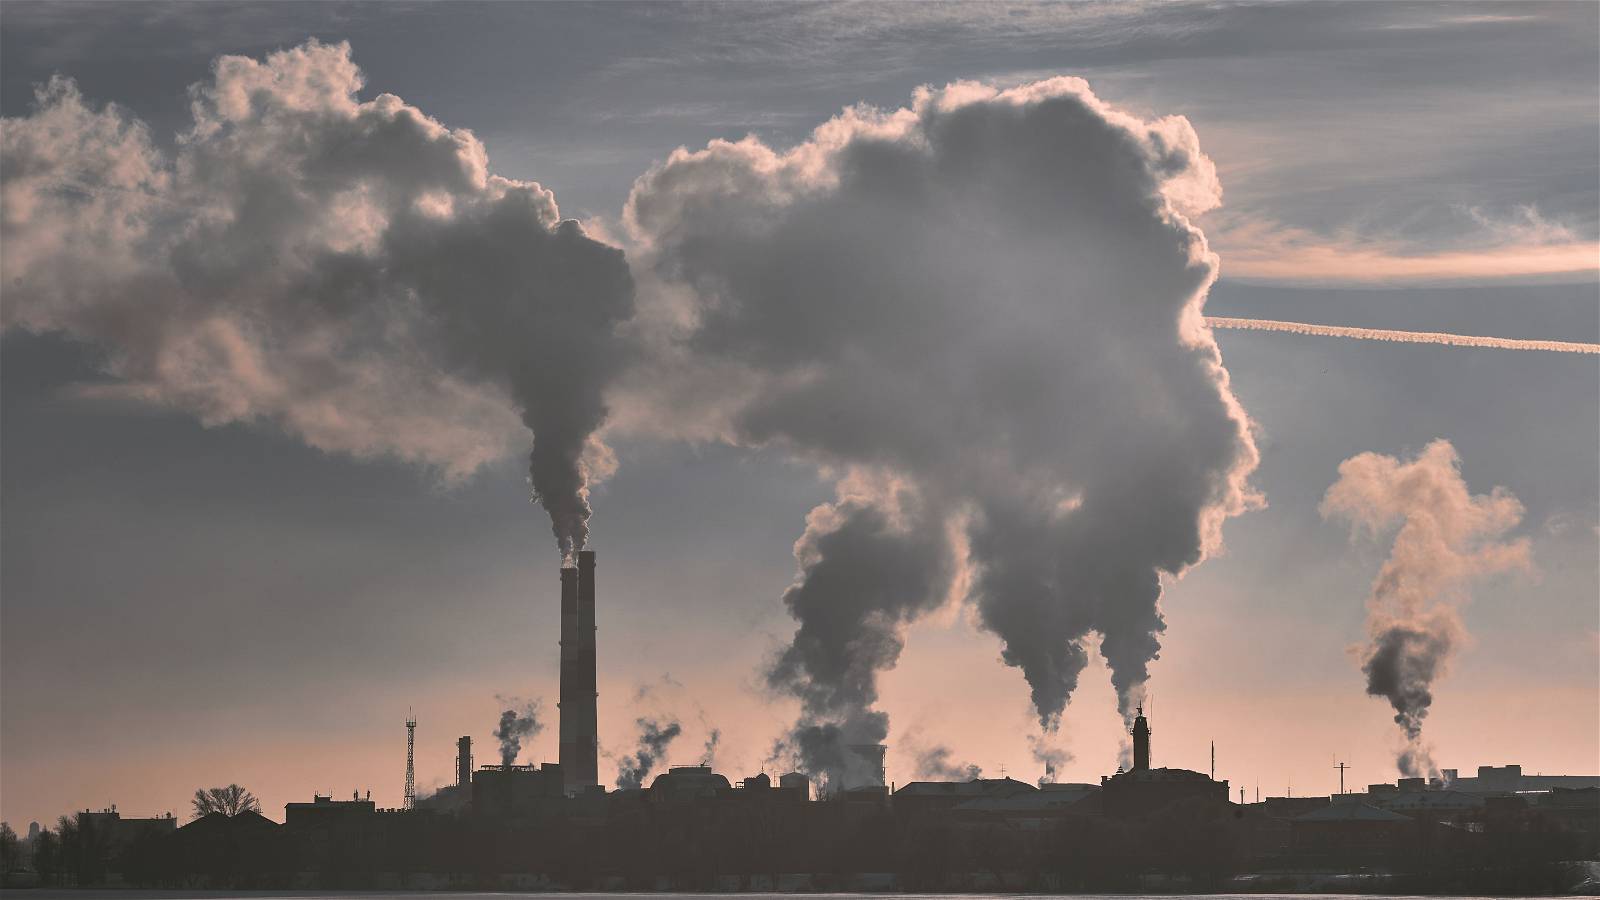 Disclosure isn’t enough: It’s time to tax high-carbon investment